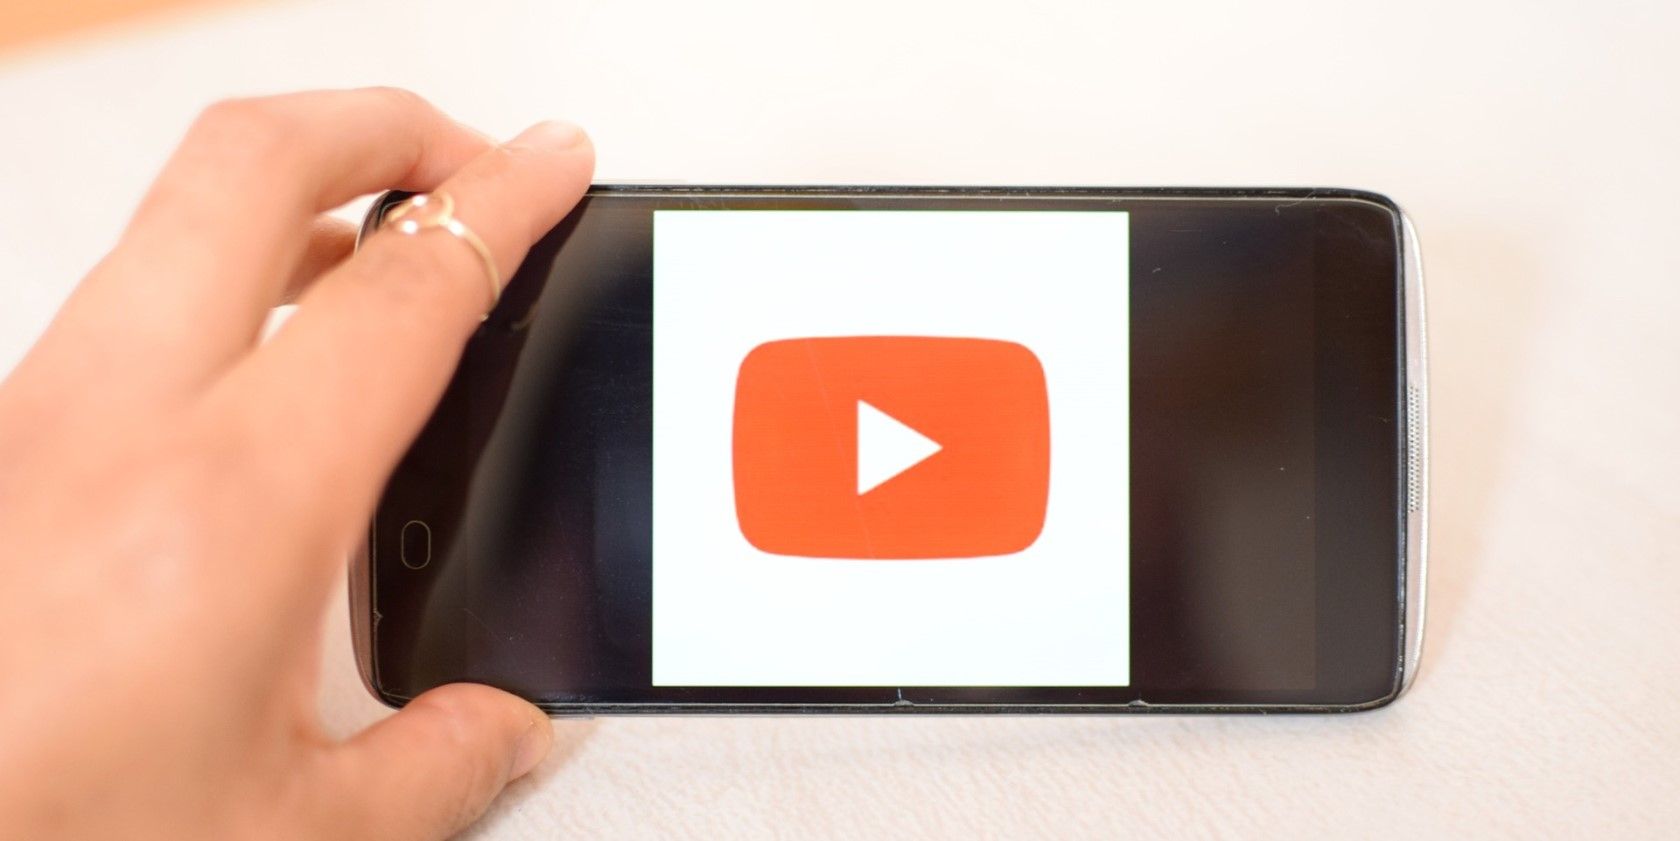 YouTube on a smartphone